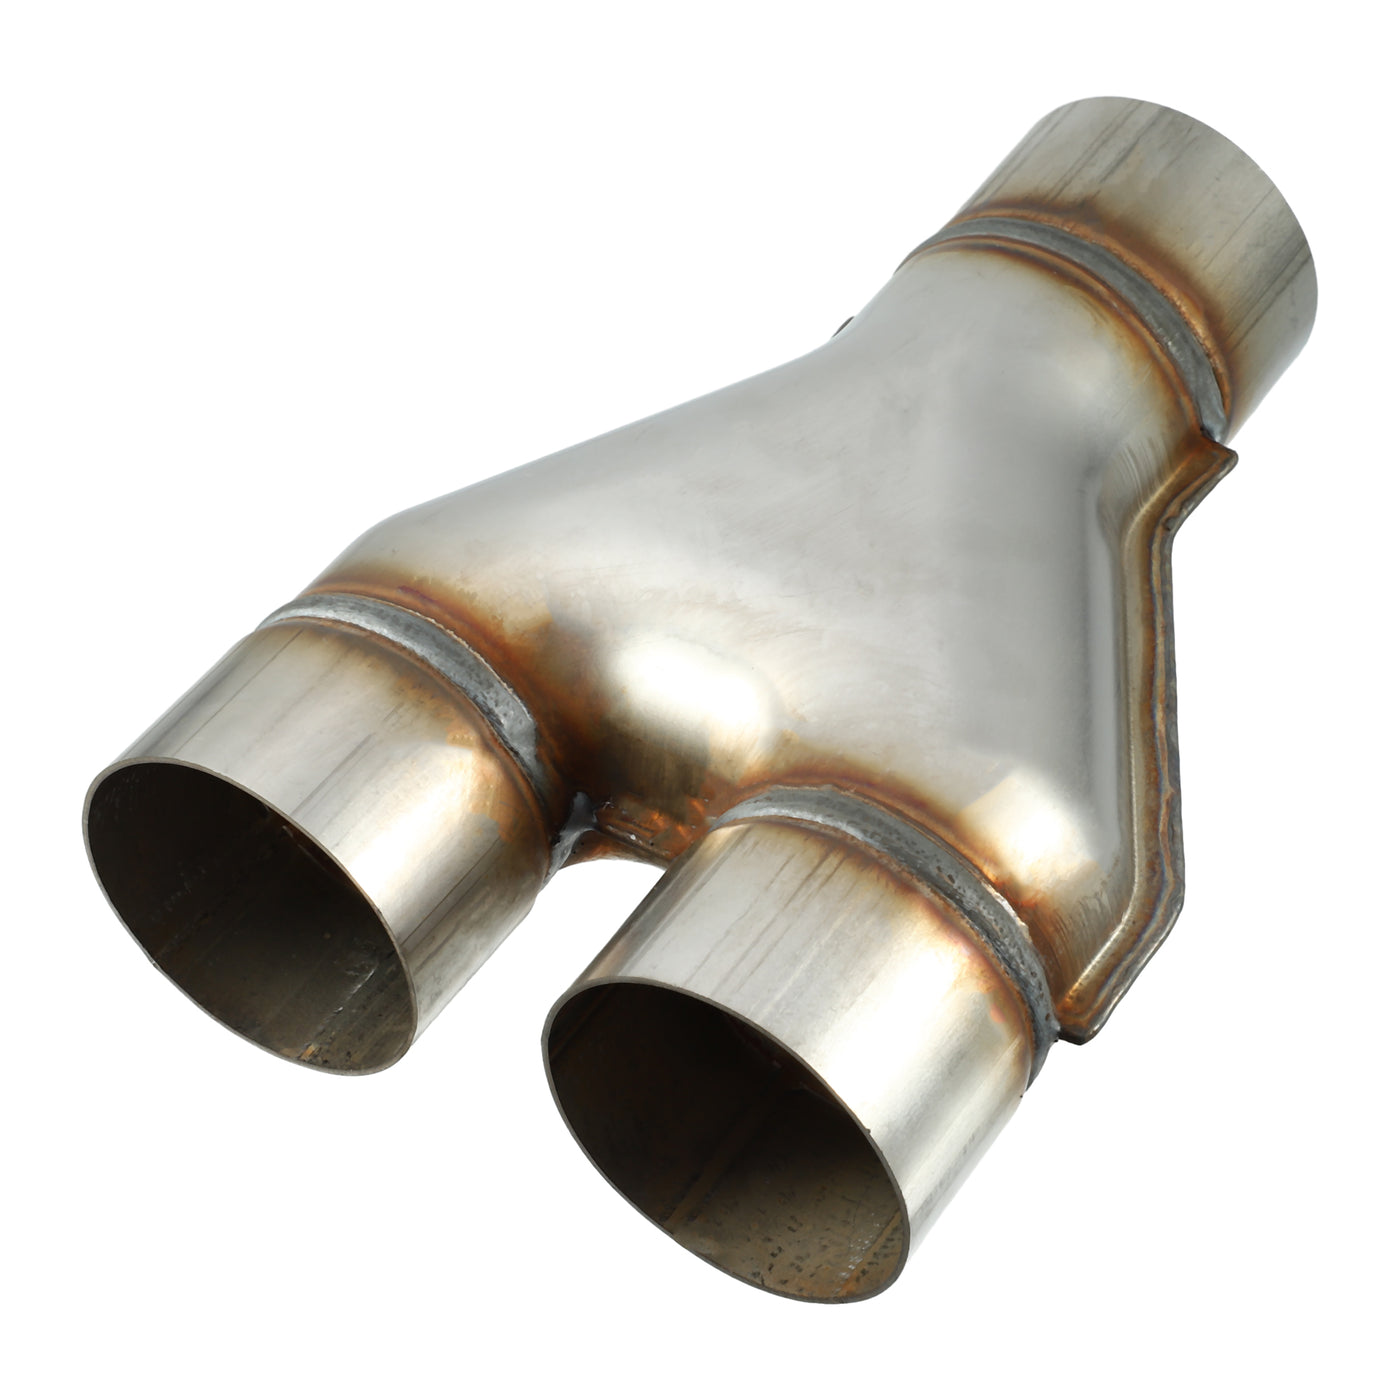 A ABSOPRO Y Pipe Exhaust Tube Adapter Connector Durable 2.75" ID Single to 2.75" ID Dual Exhaust Adapter Connector 10 Inch Overall Length T409 Stainless Steel Silver Tone